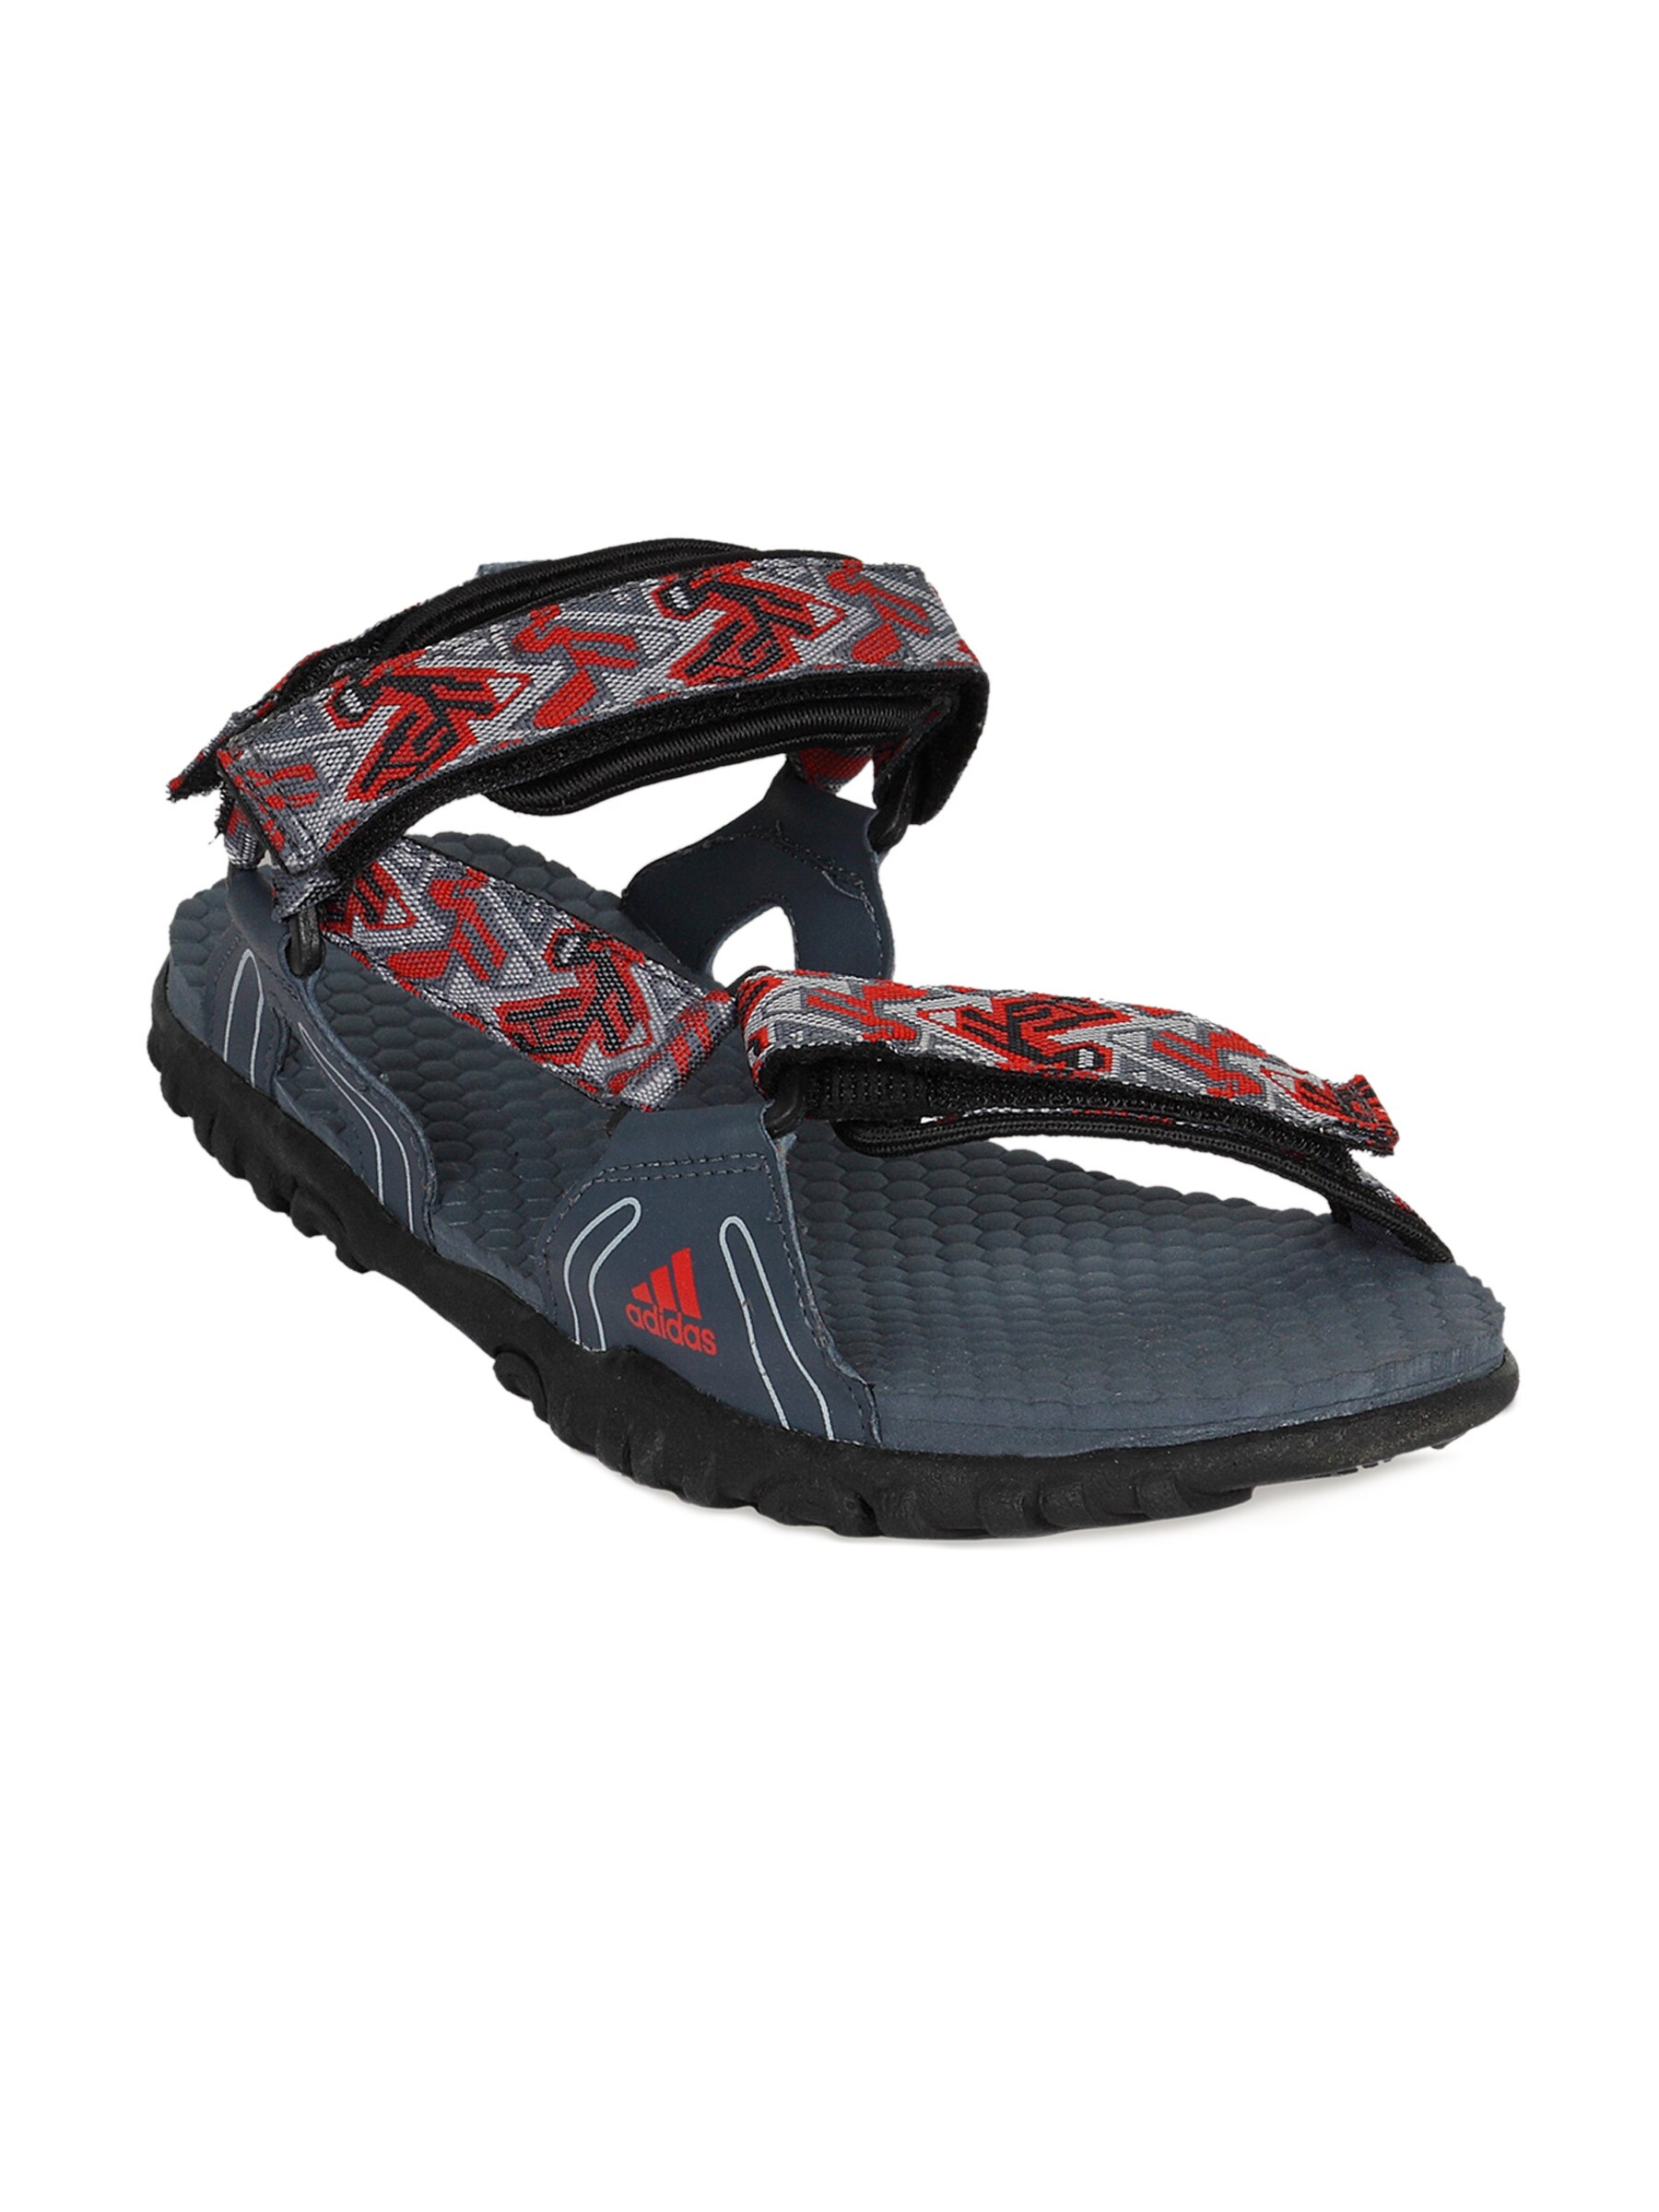 ADIDAS Men Neo Feather Lead Red Sandal